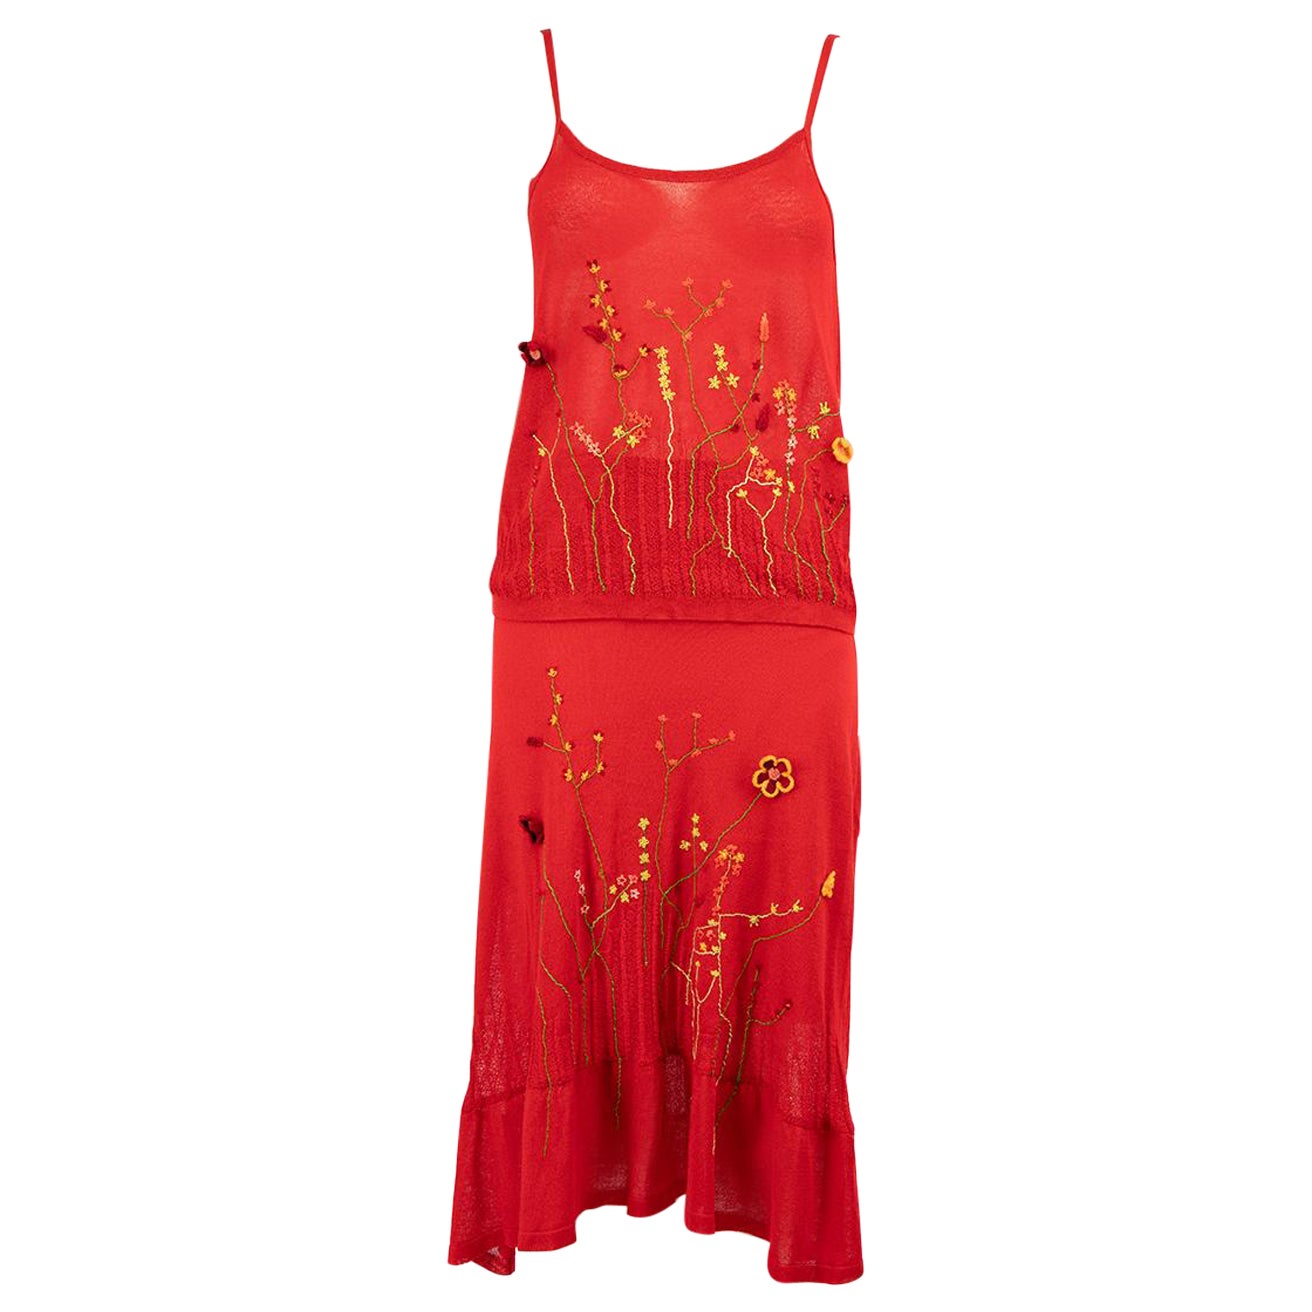 Kenzo Red Floral Embroidered Top & Skirt Set Size XL For Sale